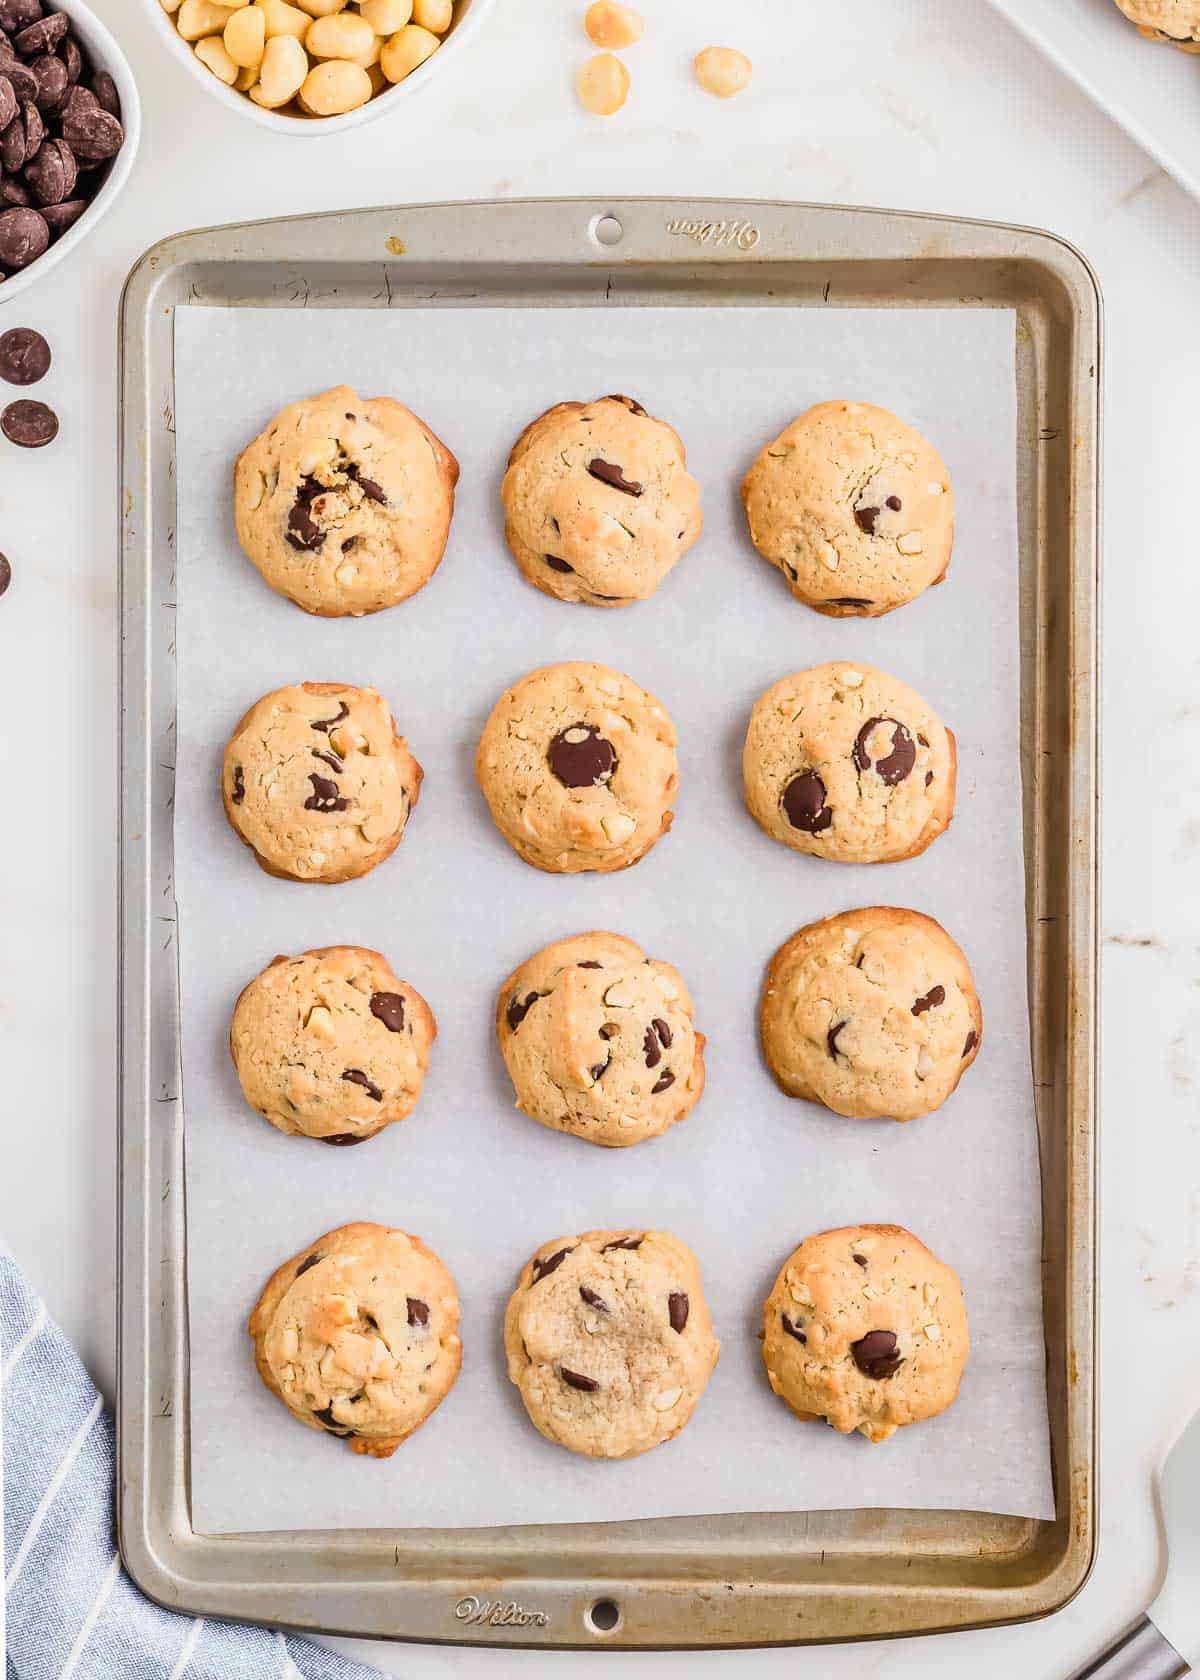 Baked chocolate chip cookies with macadamia nuts on a baking sheet.